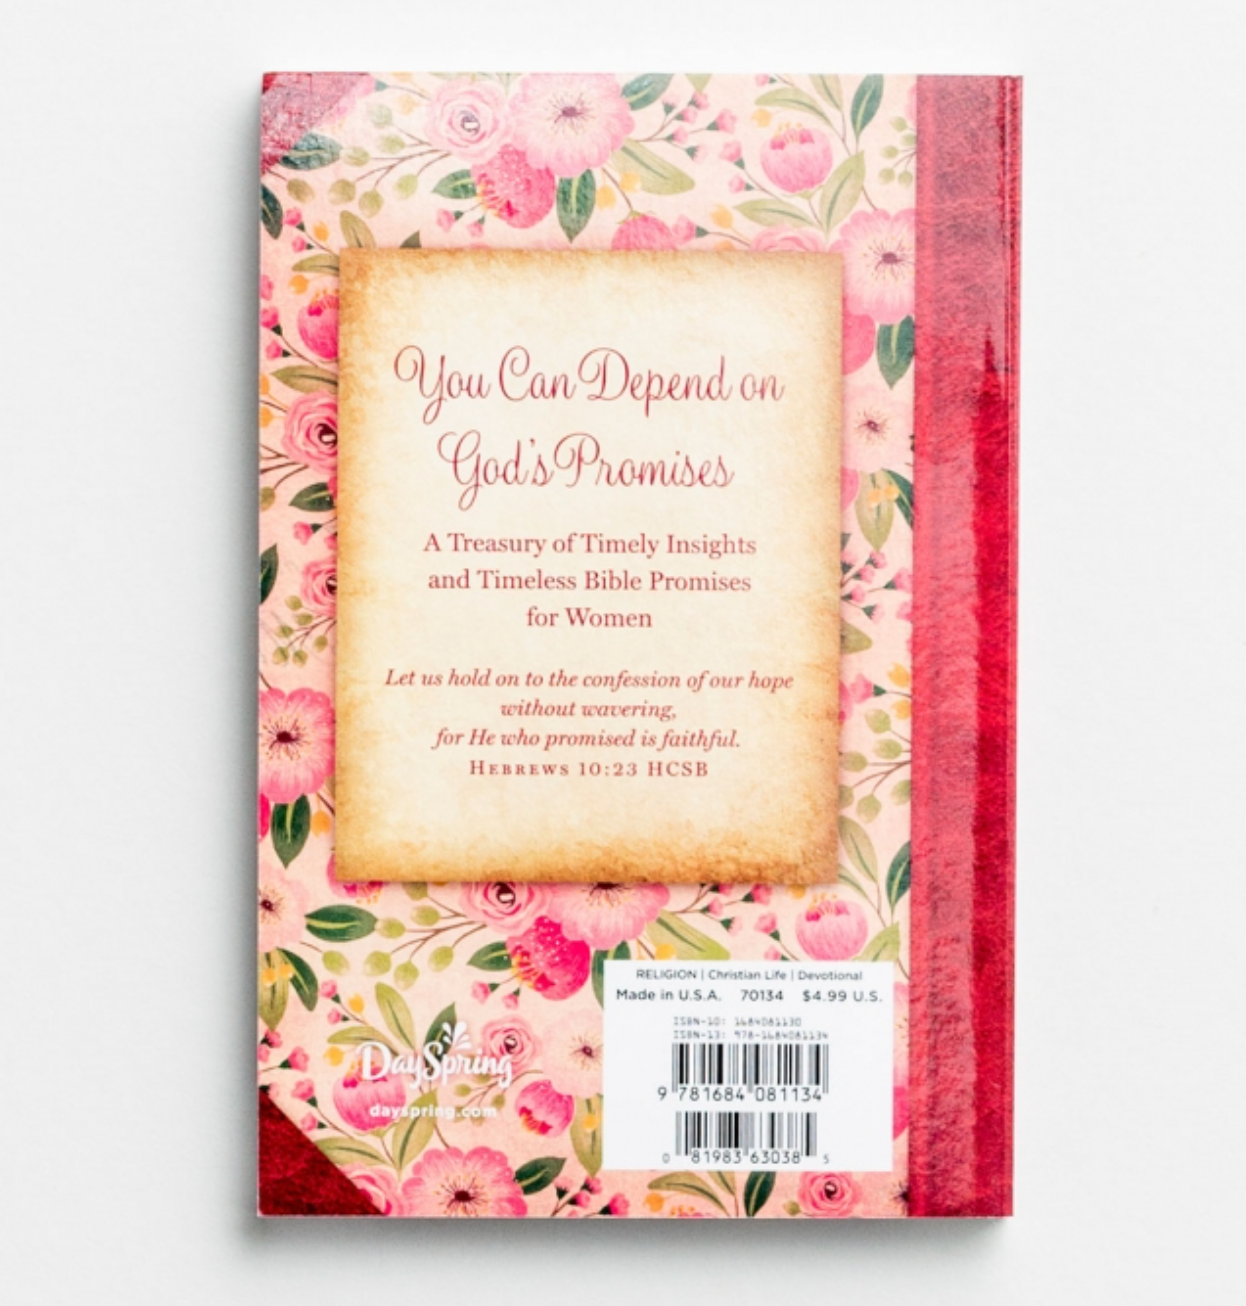 Pocketful of Bible Promises for Godly Women - Devotional Book